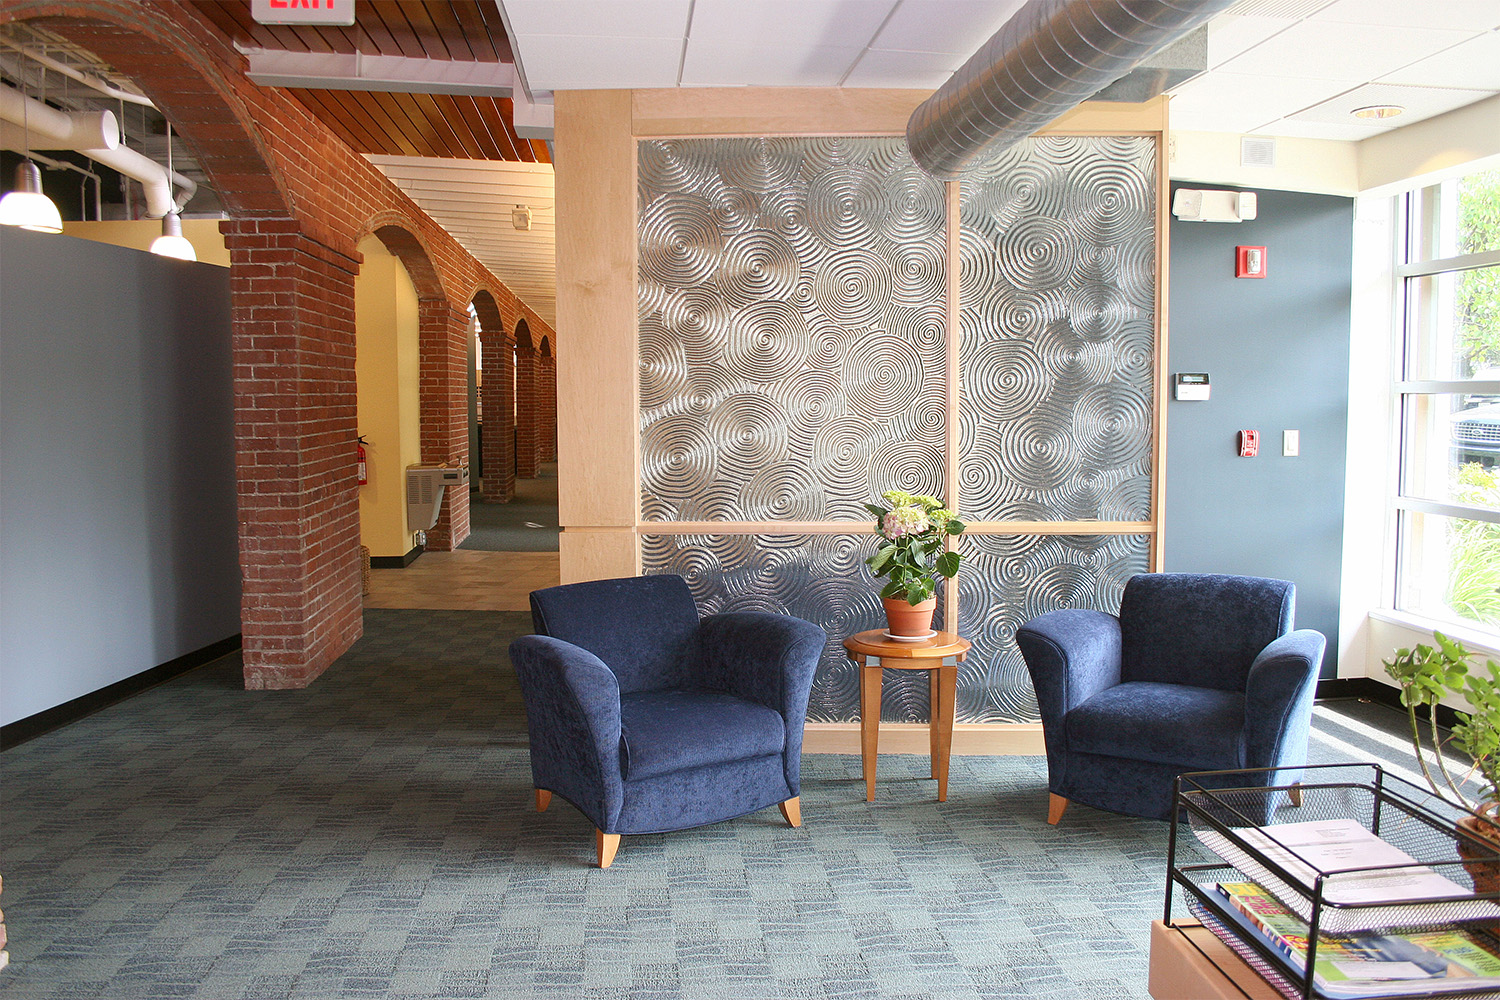 Lobby area with artful glass wall and plush blue chair seating 